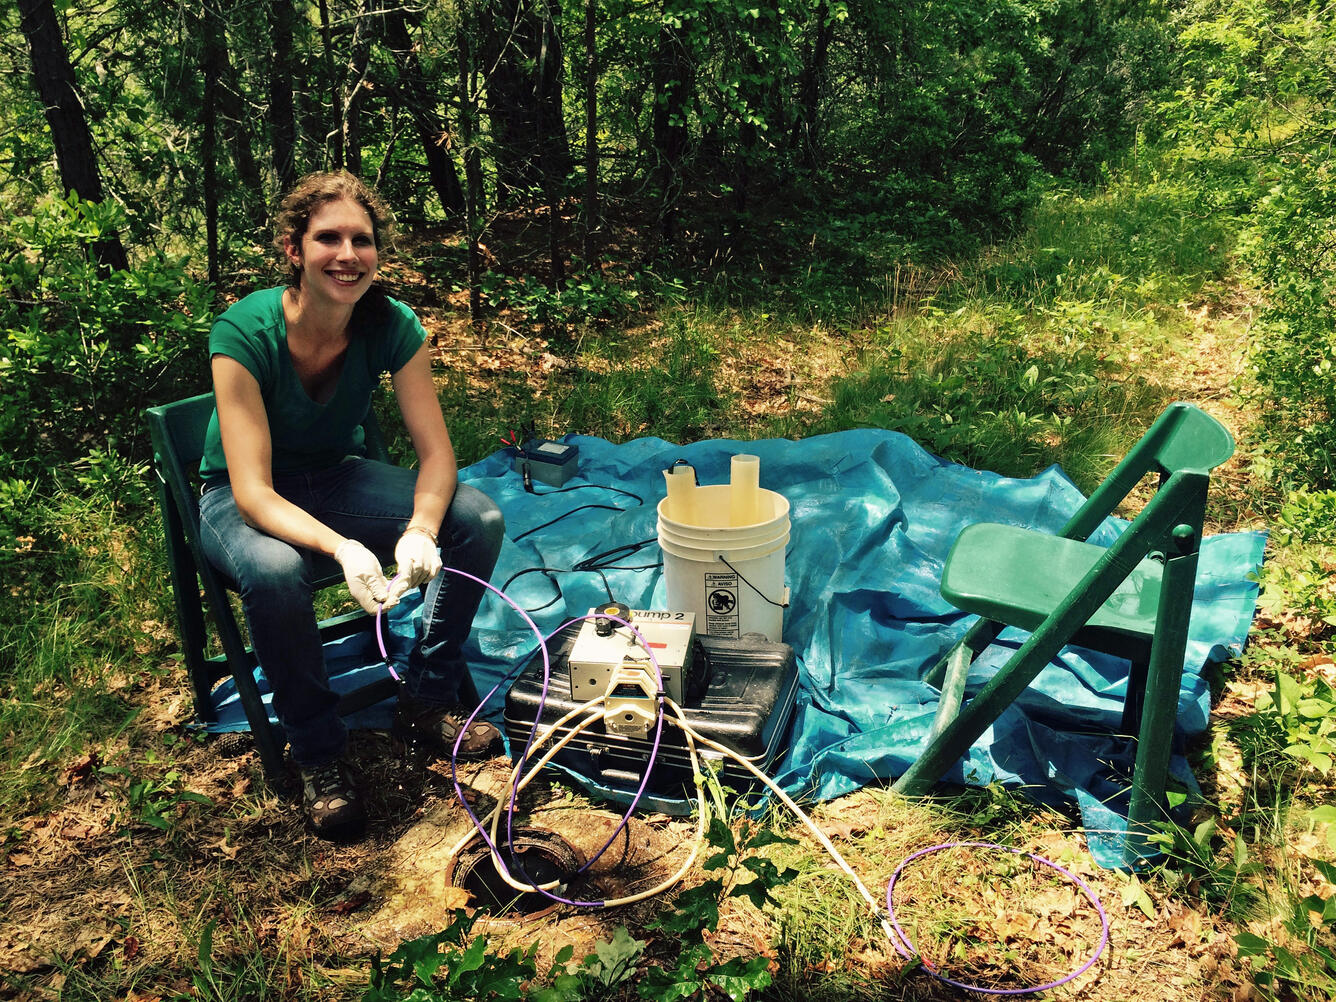 USGS scientist collecting groundwater samples